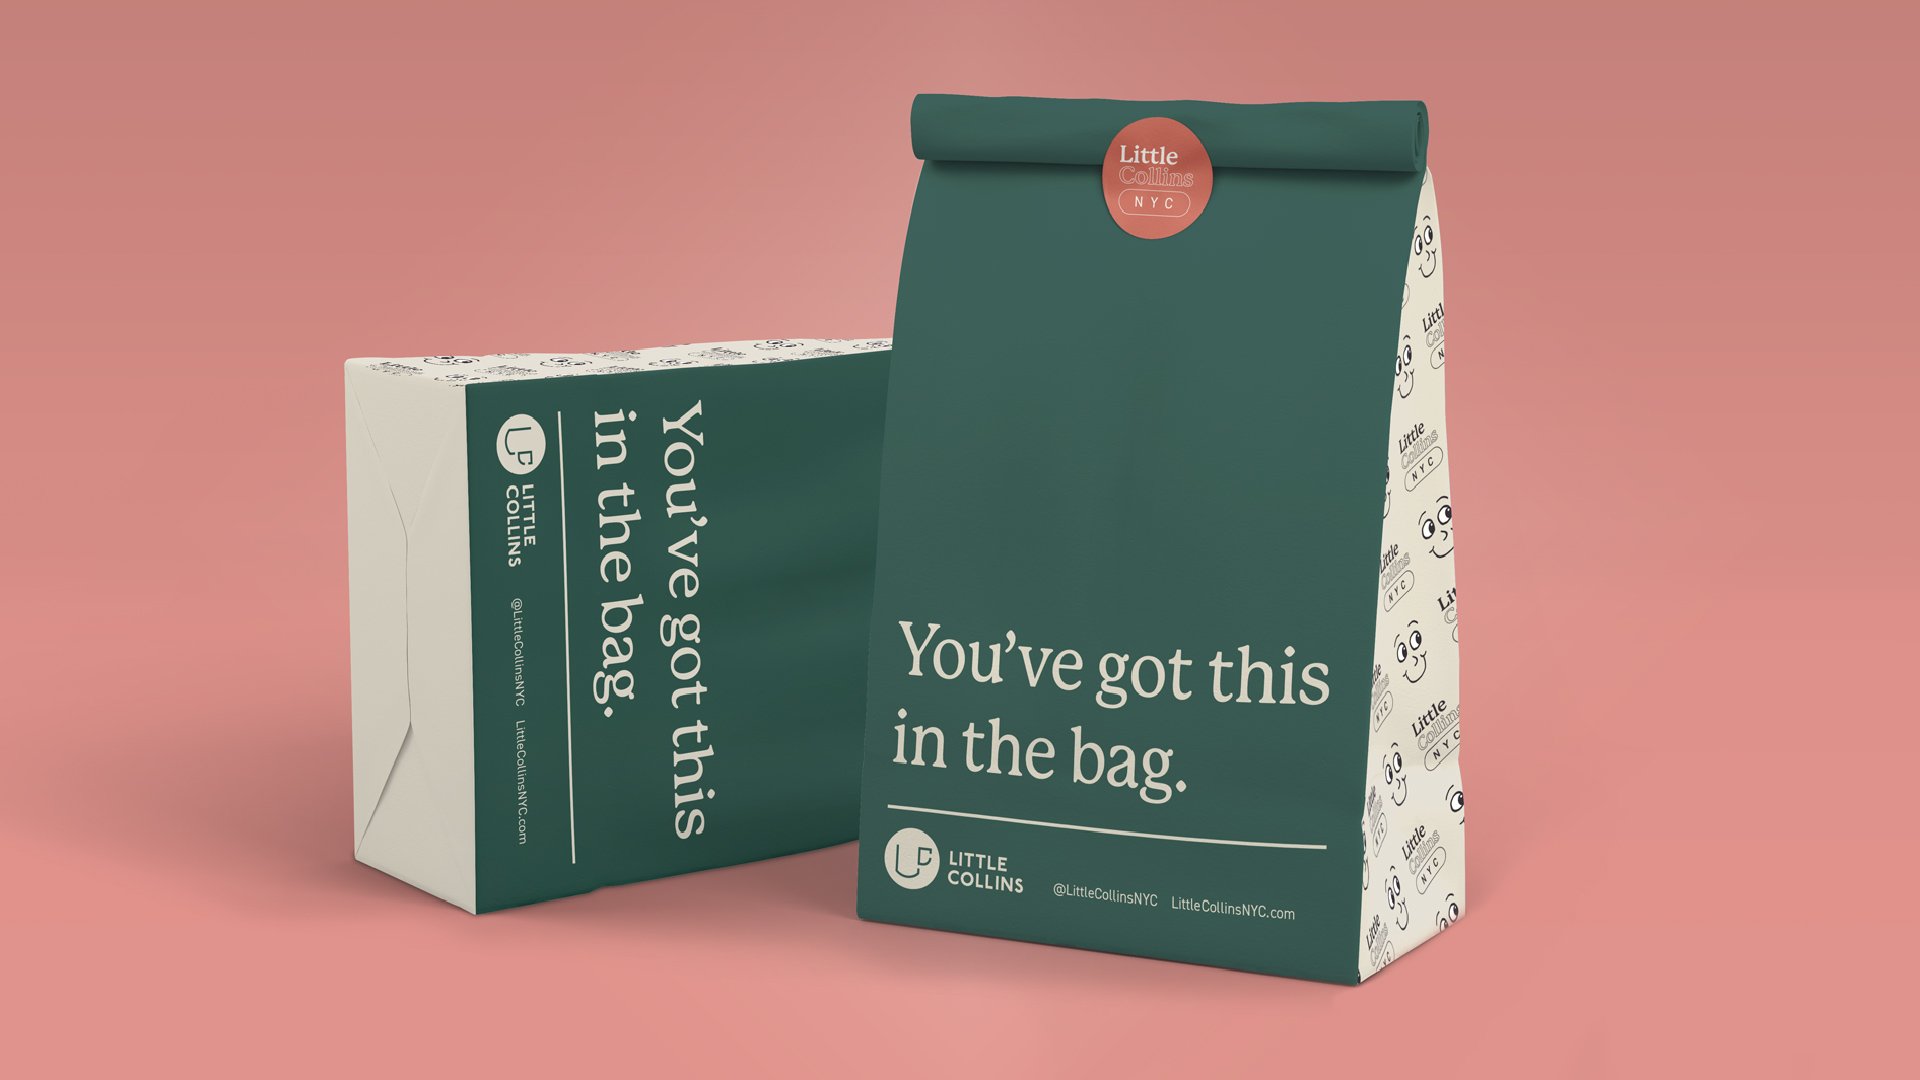 A dark teal and cream colored bag sits against a coral-colored backdrop. The text reads, “You’ve got this in the bag.” Illustrations of the logo and Collin line the sides of the bag. The top of the bag is sealed with a Little Collins NYC sticker.